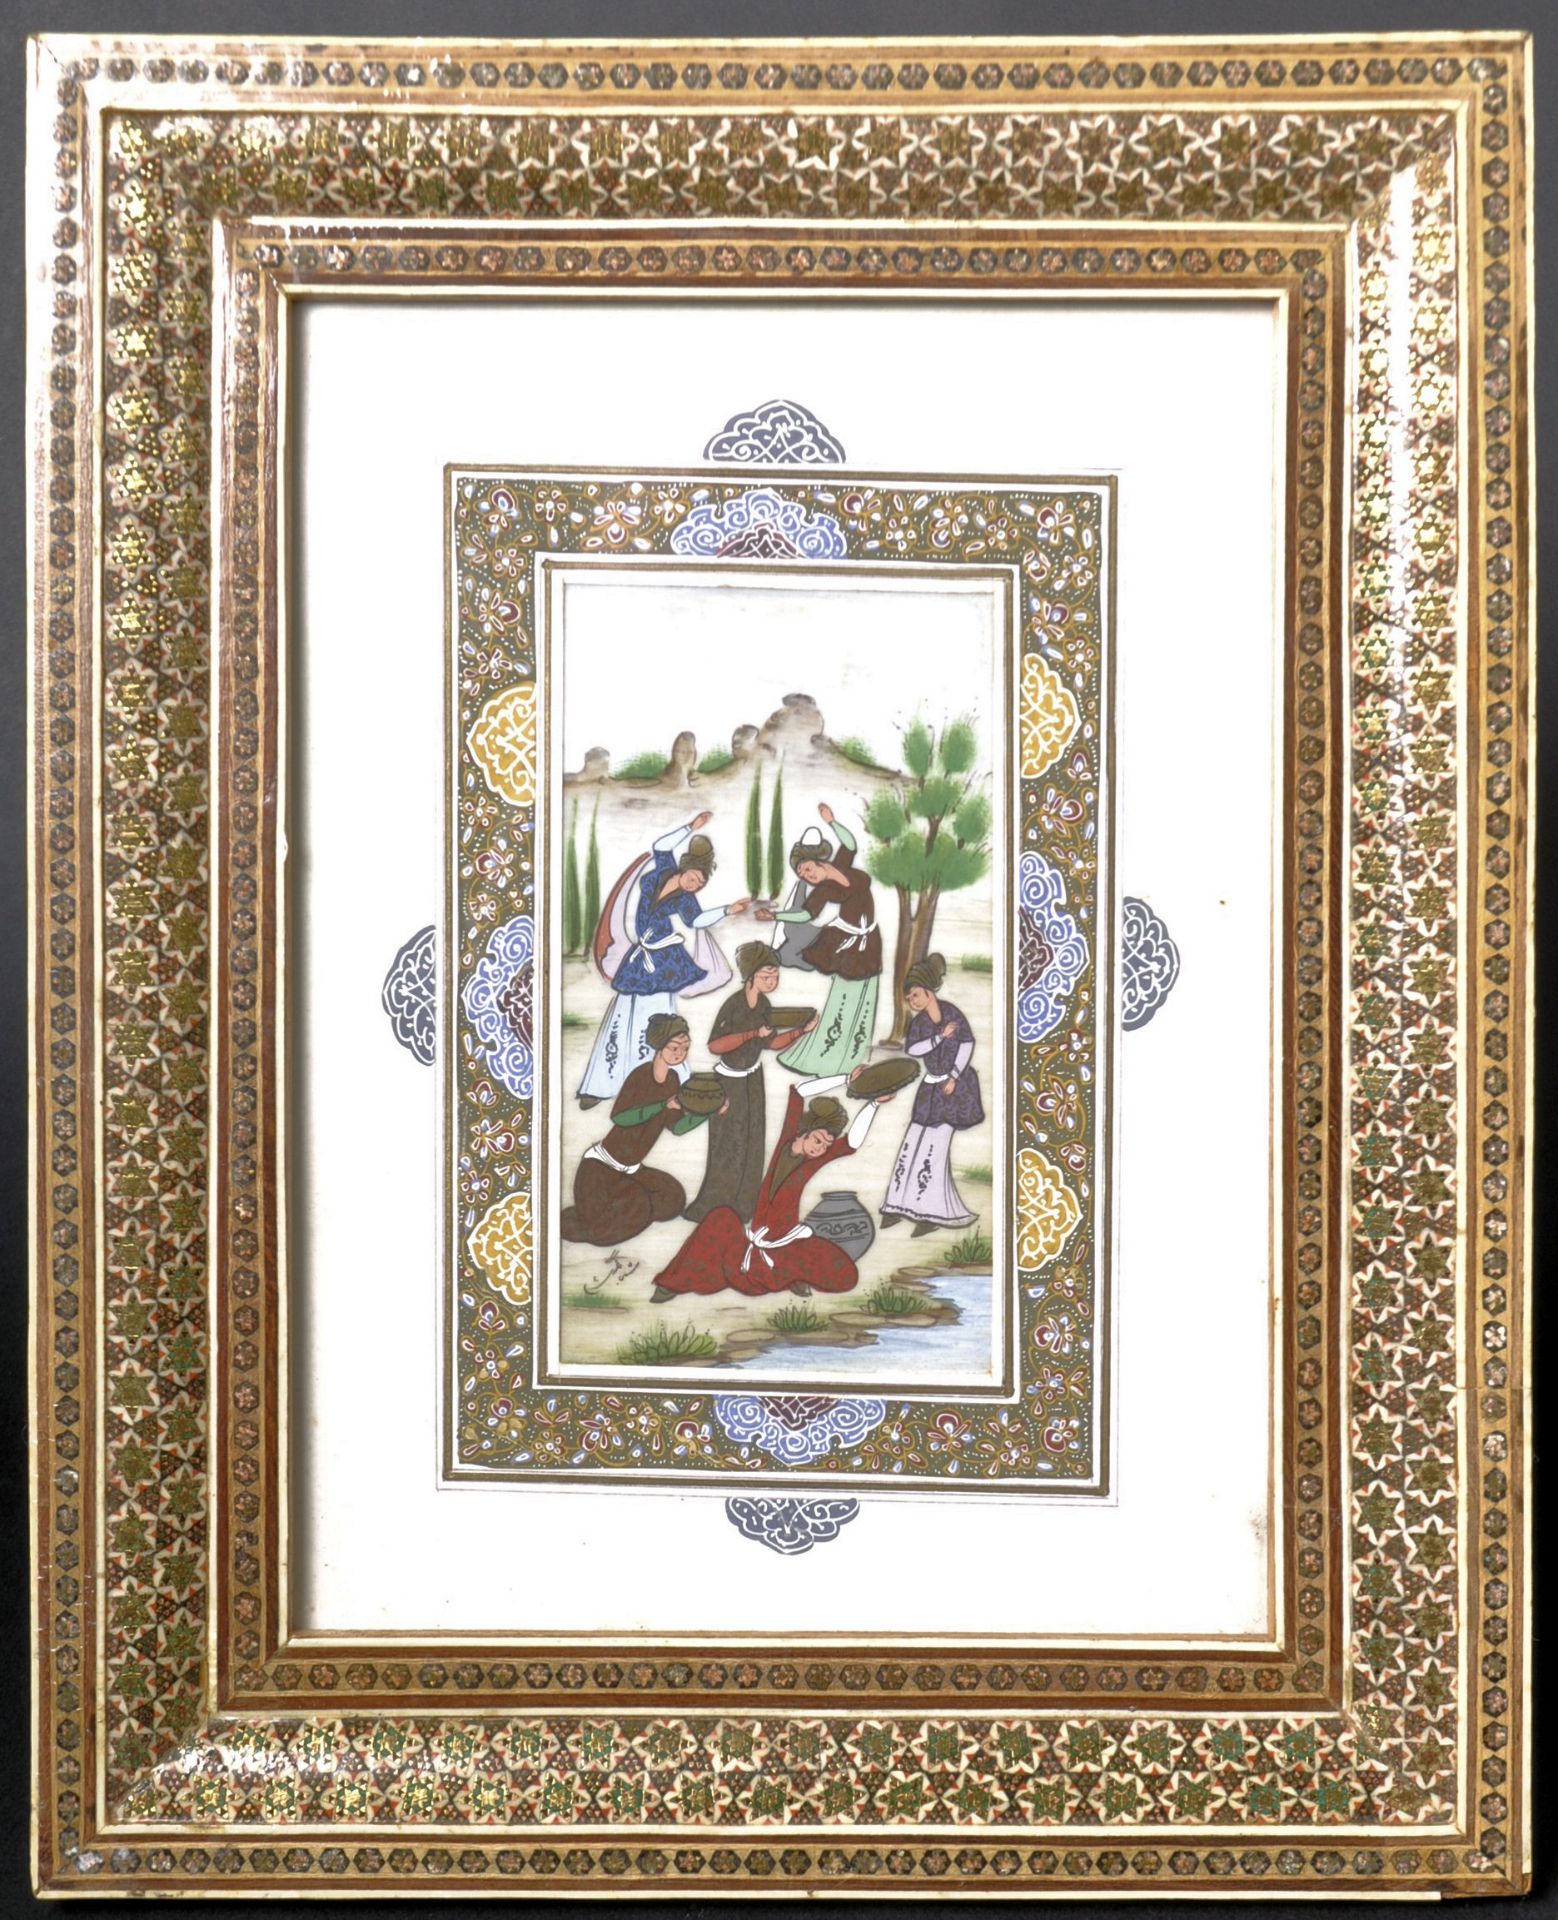 19TH CENTURY ANGLO INDIAN PERSIAN MUGHAL IVORY PANEL IN FRAME